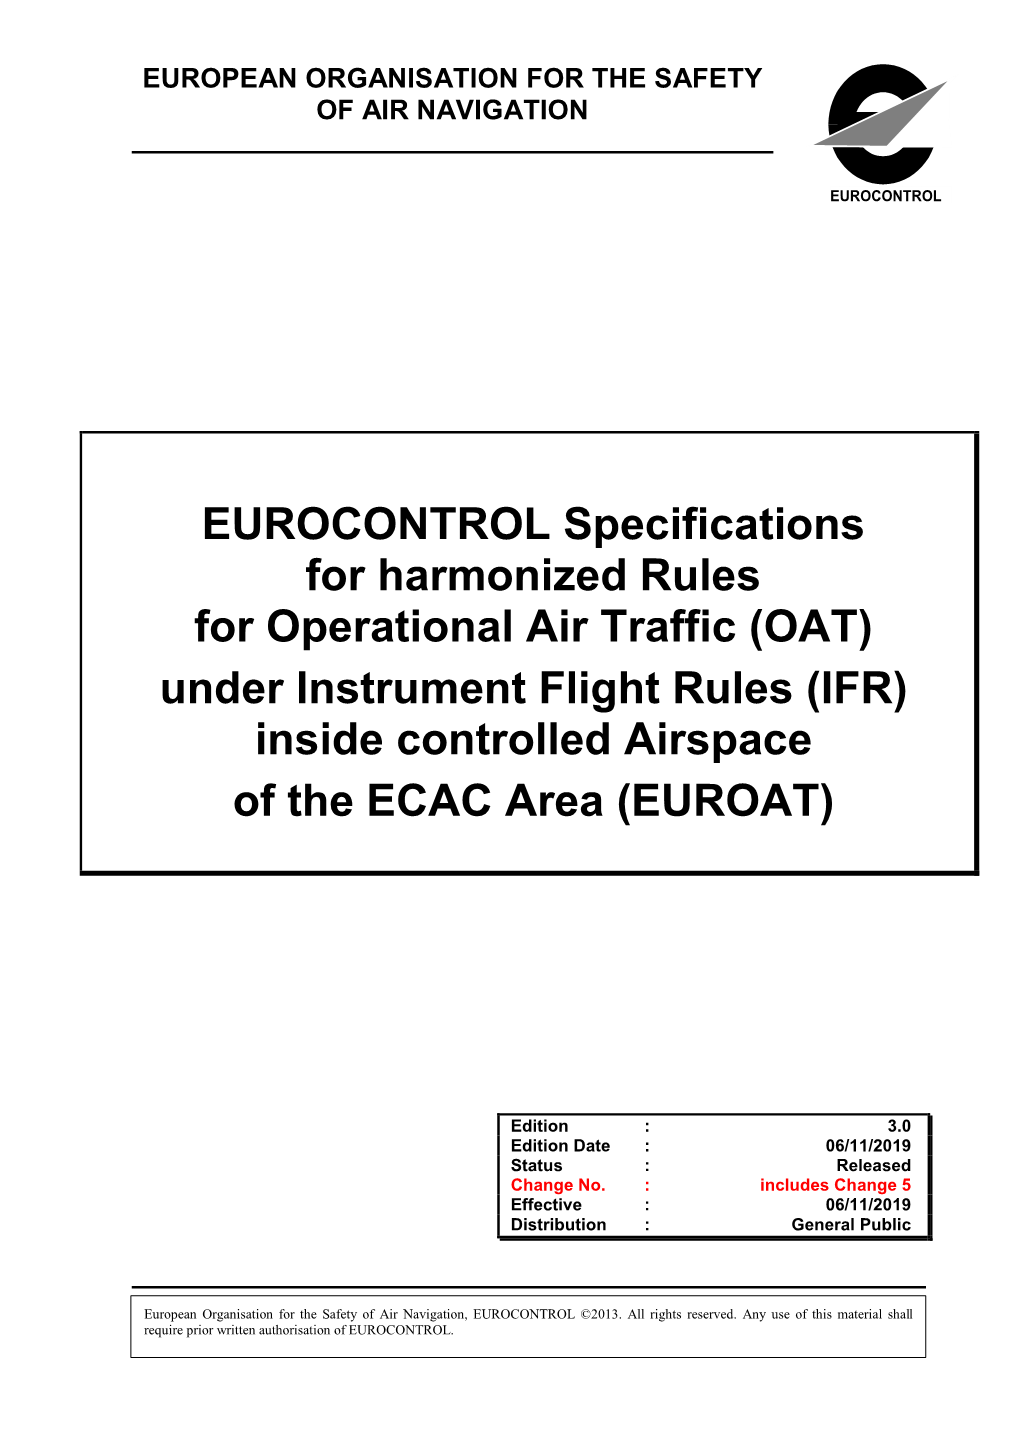 OAT) Under Instrument Flight Rules (IFR) Inside Controlled Airspace of the ECAC Area (EUROAT